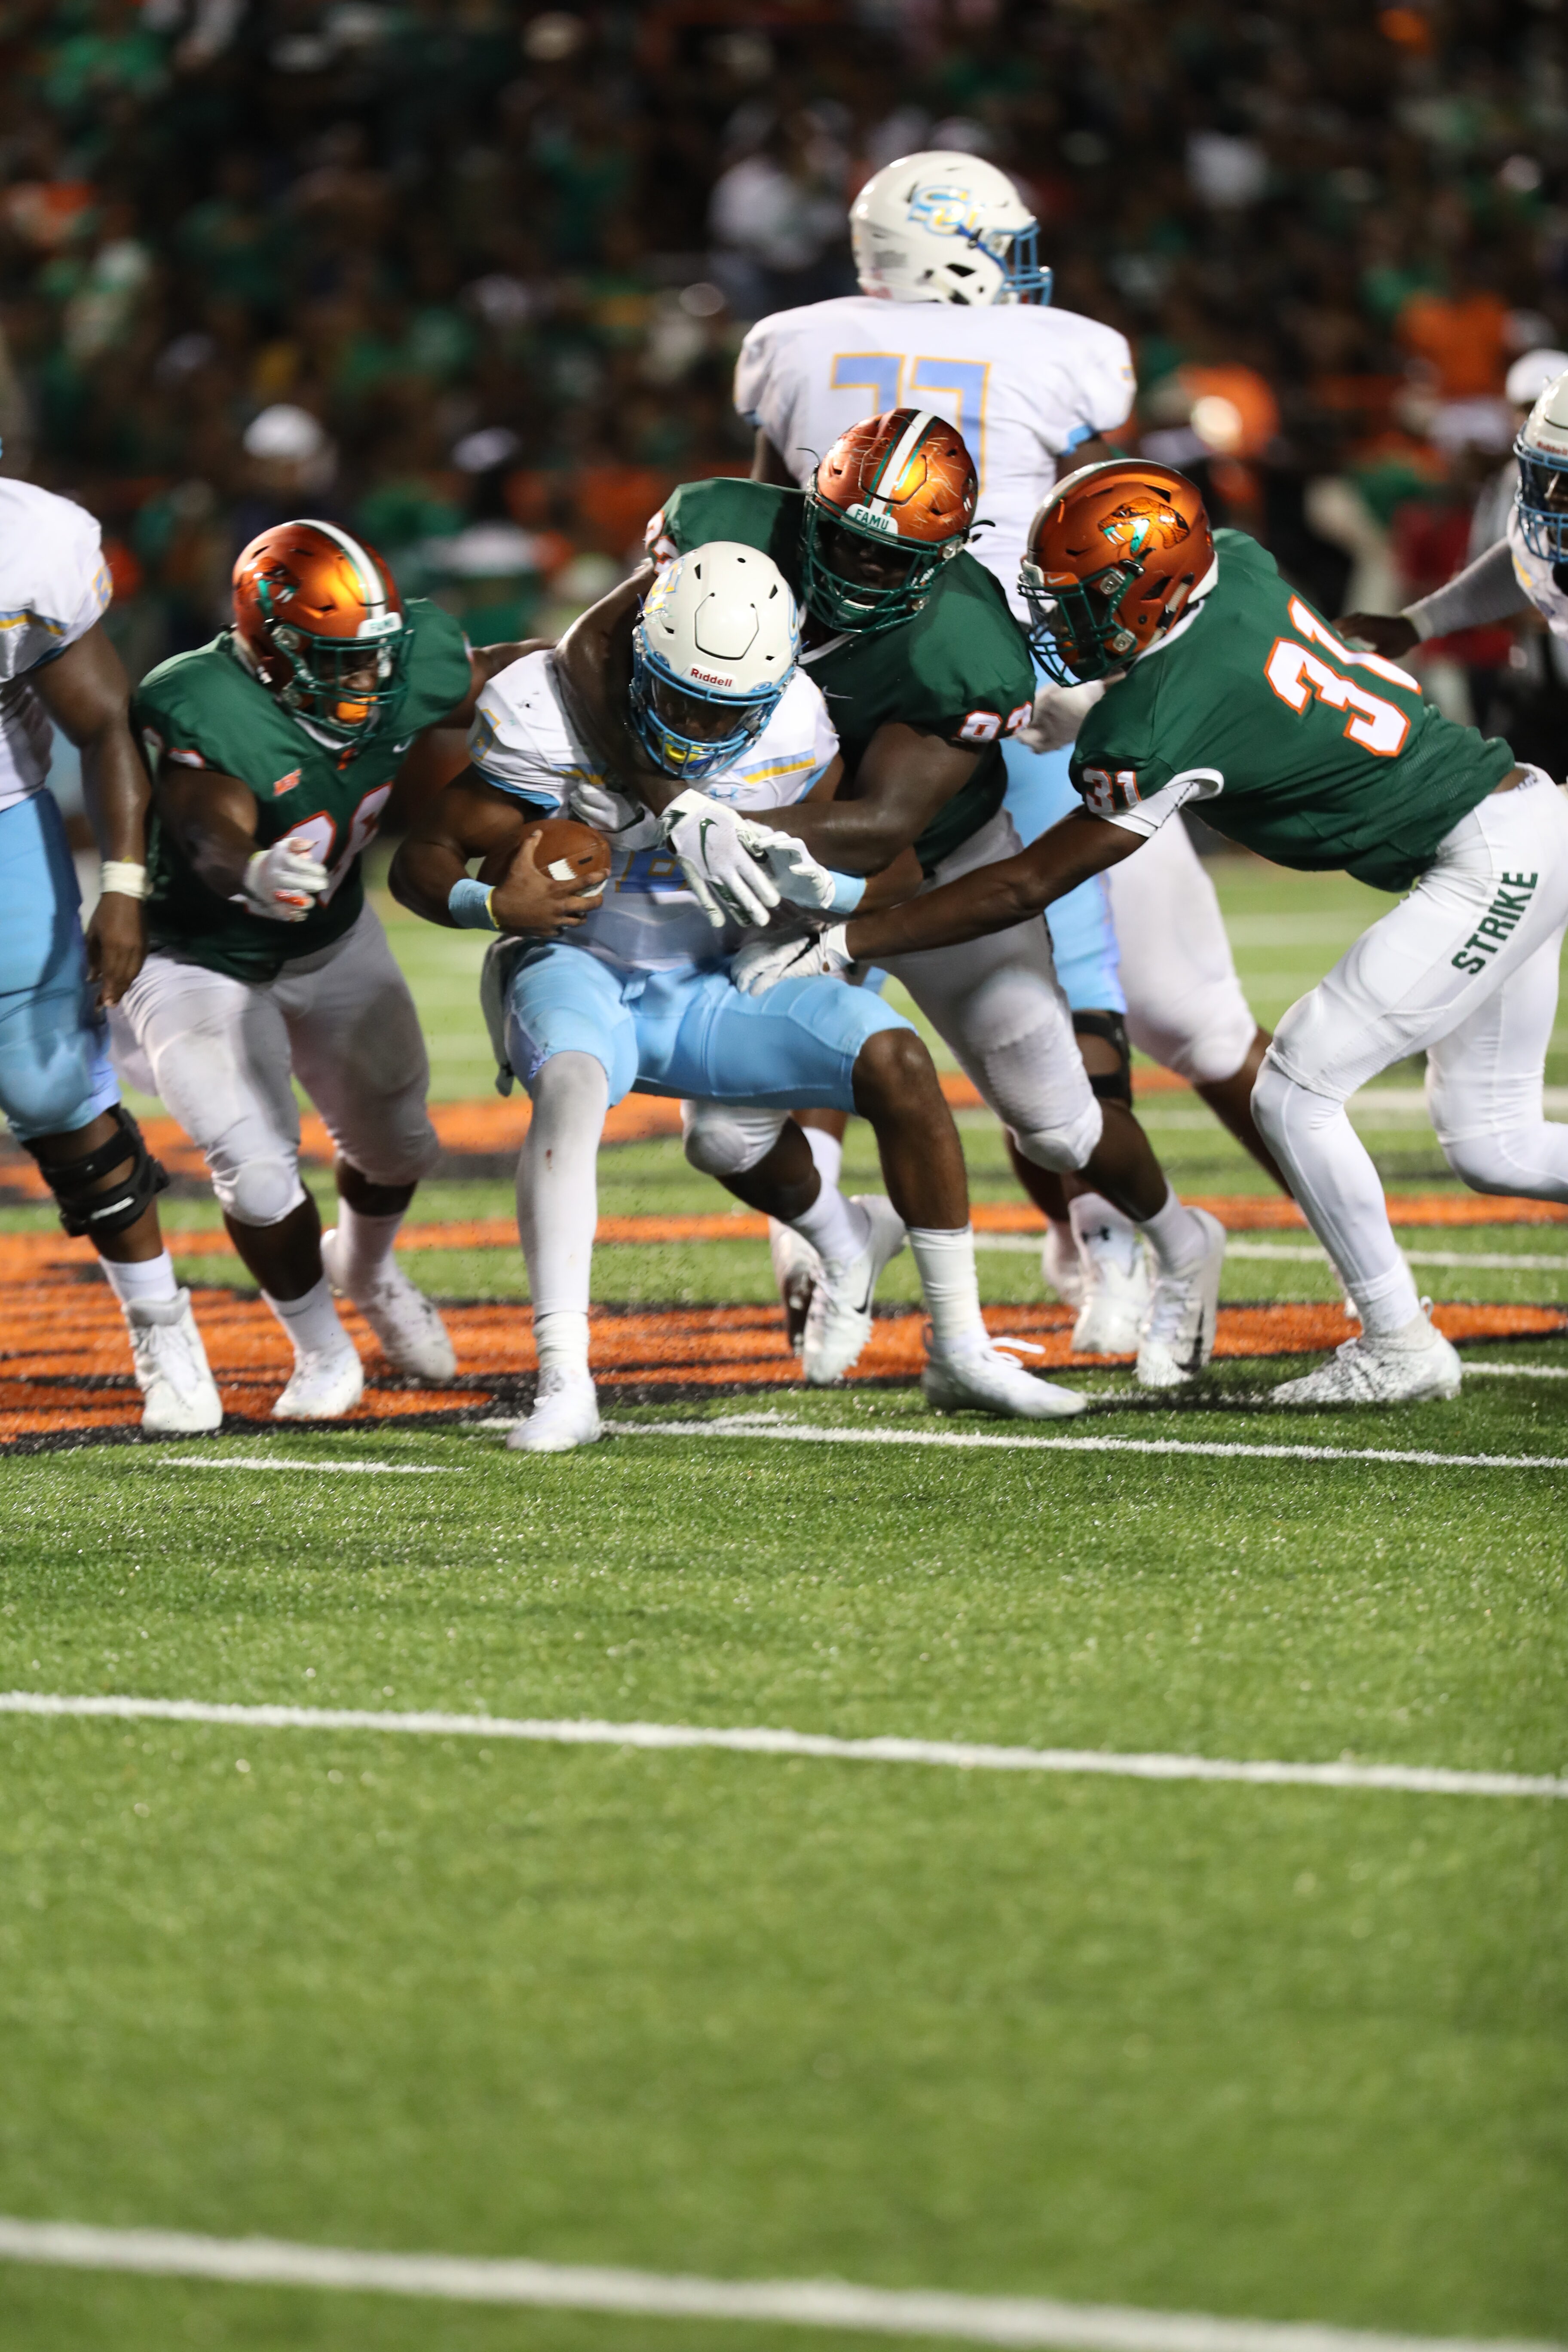 FAMU vs. Southern Football Preview The Famuan